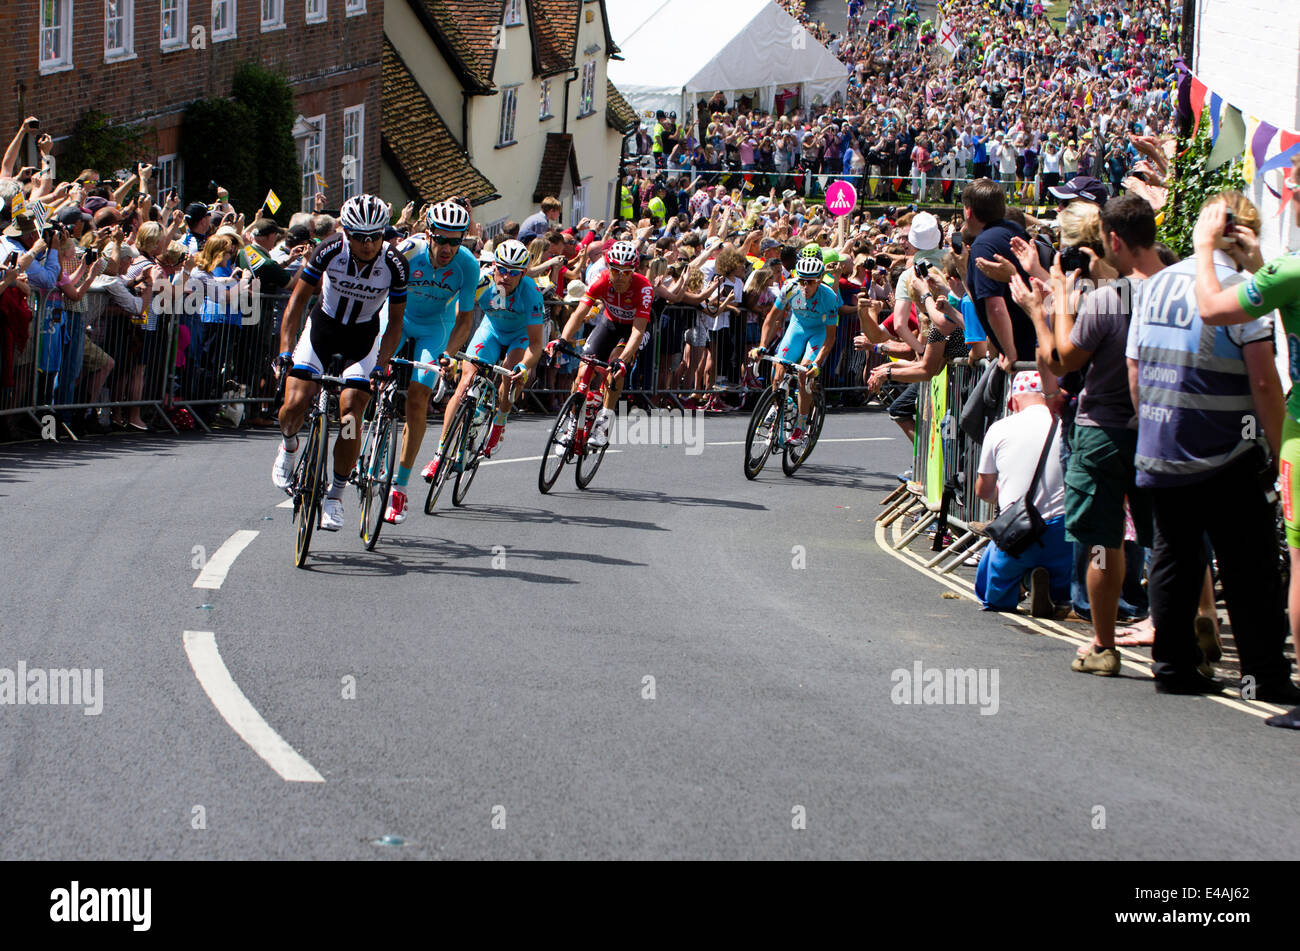 Finchingfield, Essex, UK. 07th July, 2014. The Tour de France stage from Cambridge to London runs through the picturesque Essex village of Finchingfield.  Cyclists race up a hill on Wethersfield Road Credit:  William Edwards/Alamy Live News Stock Photo